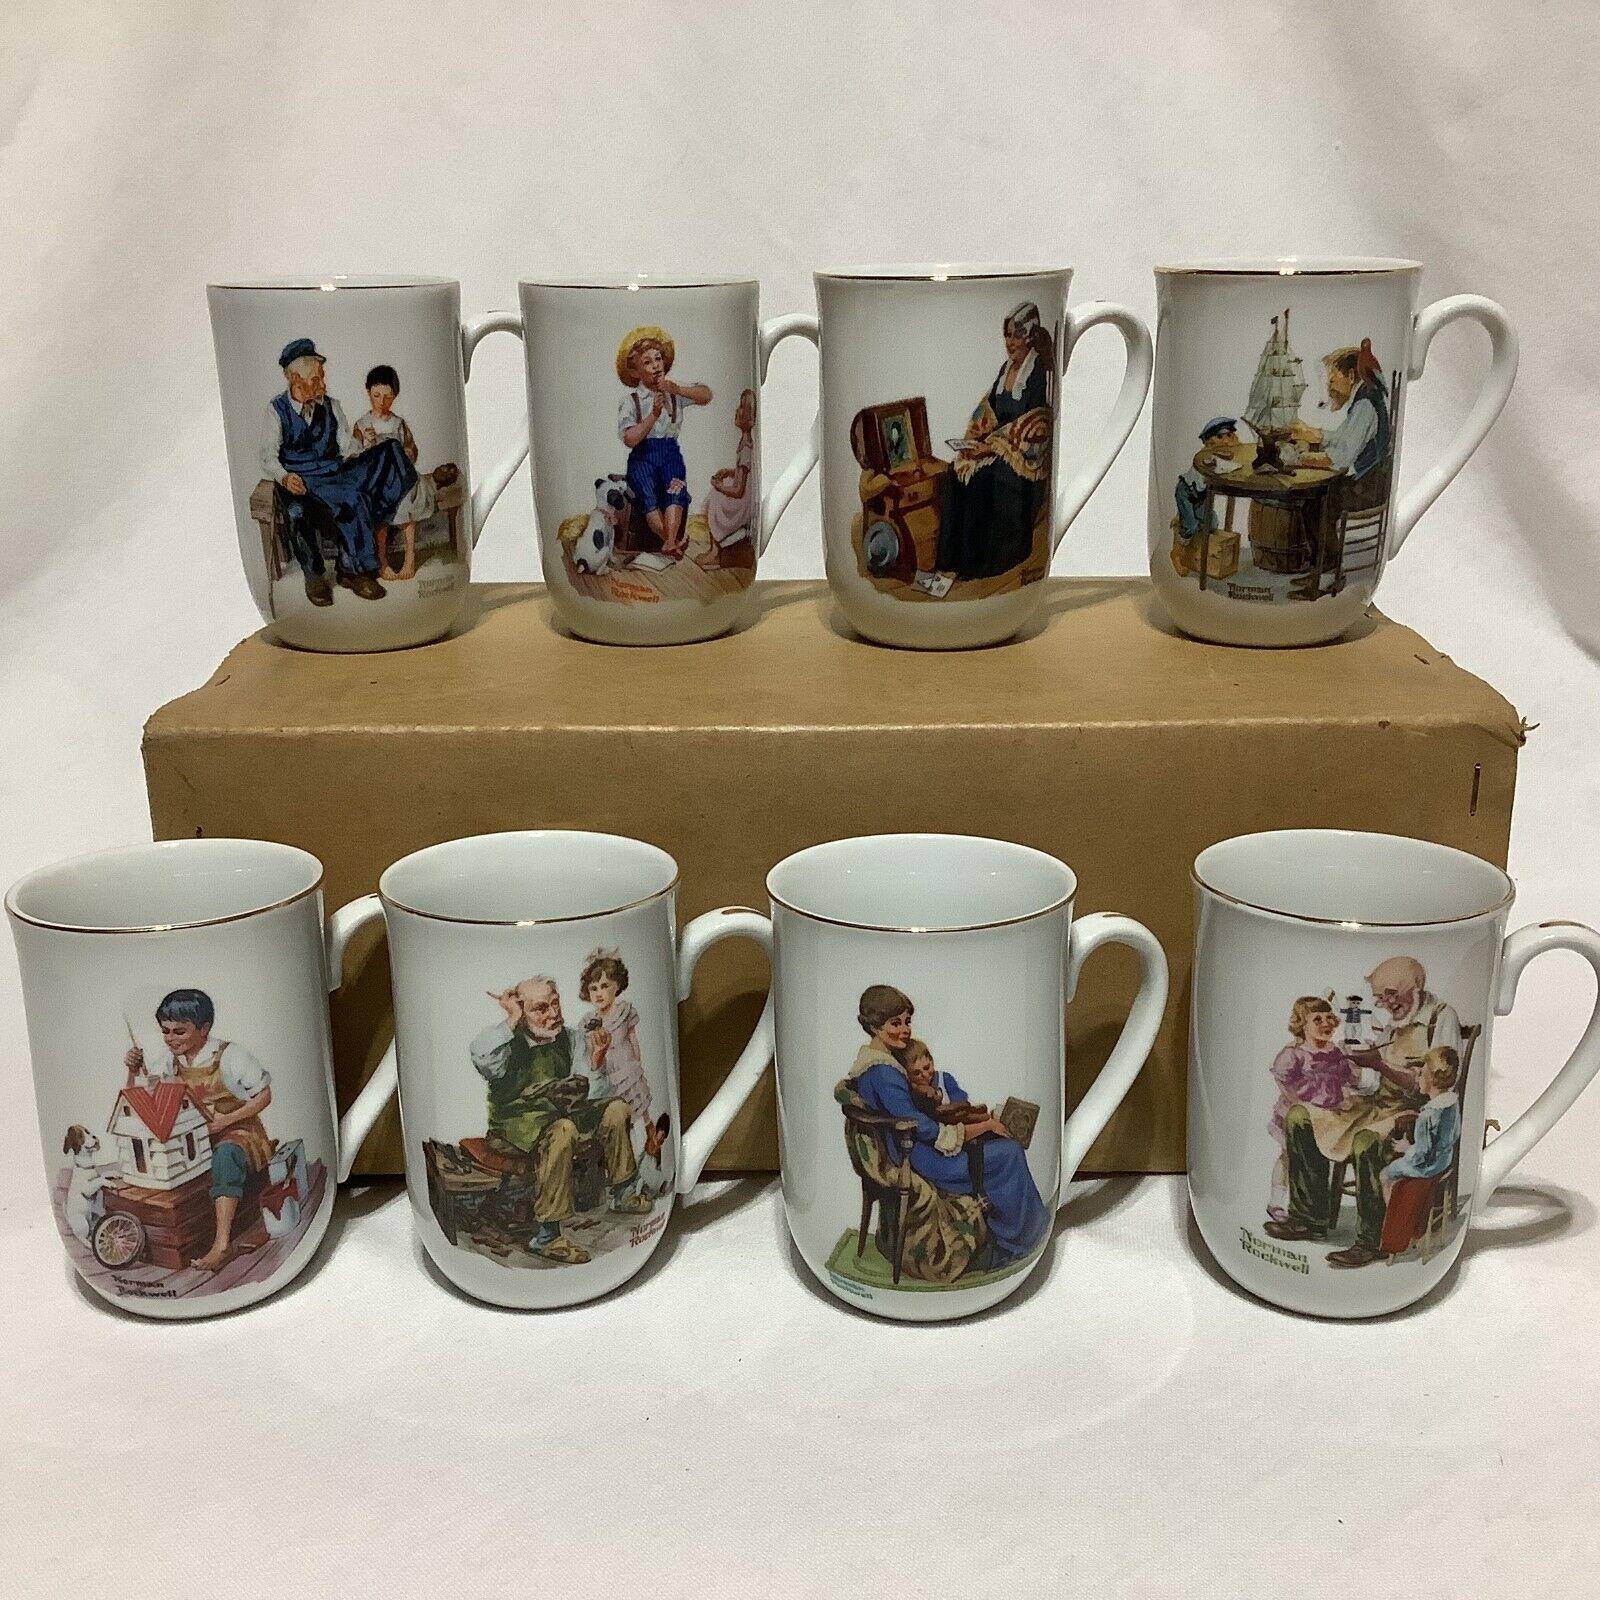 VTG Norman Rockwell Museum Collection Mugs Cups Set of 8 Japan '82 Gold Orig Box